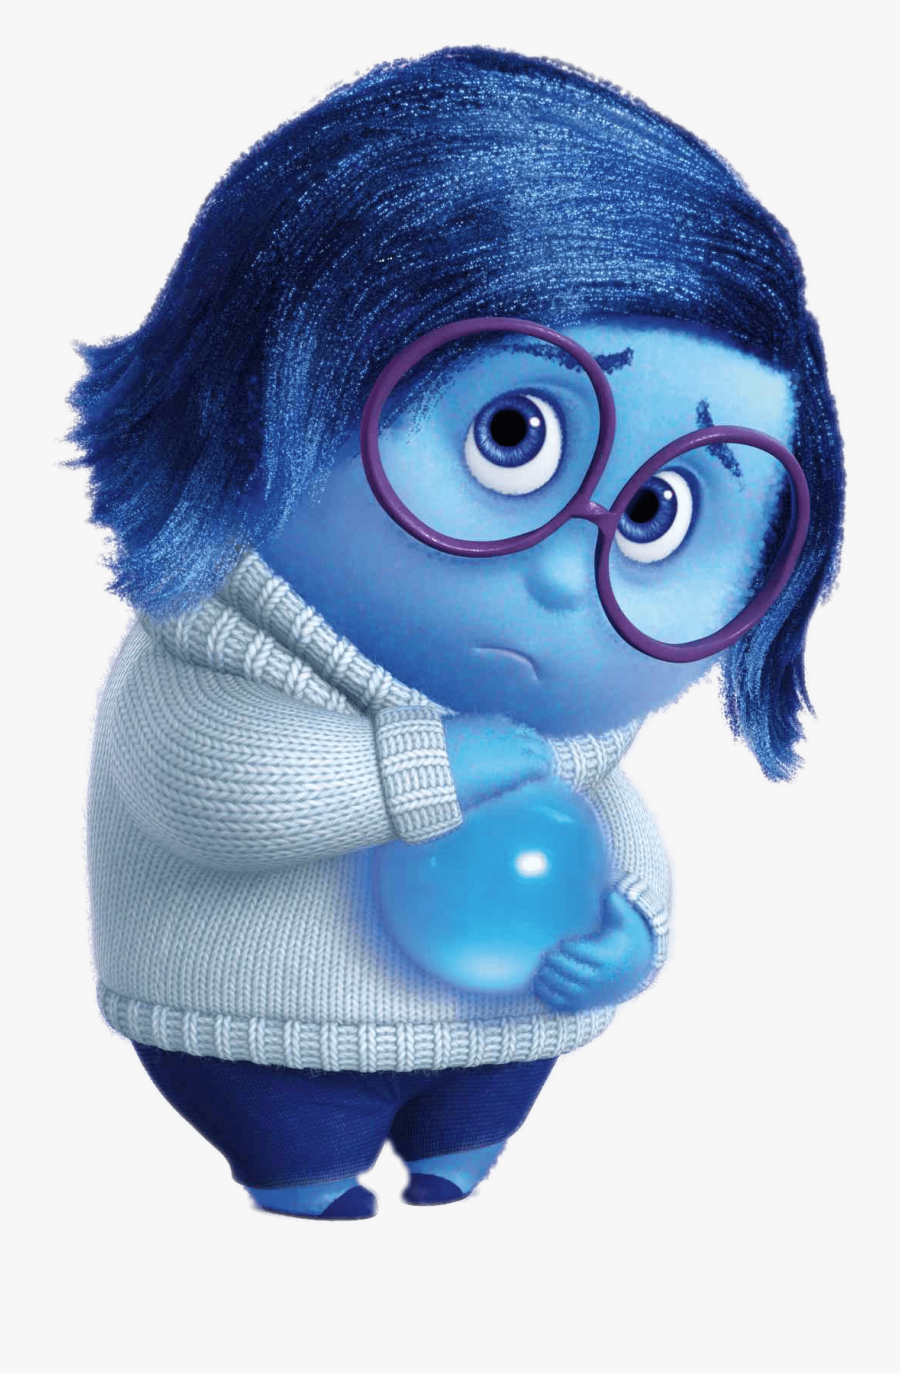 Sadness Holding Ball - Sadness Inside Out Png, Transparent Clipart